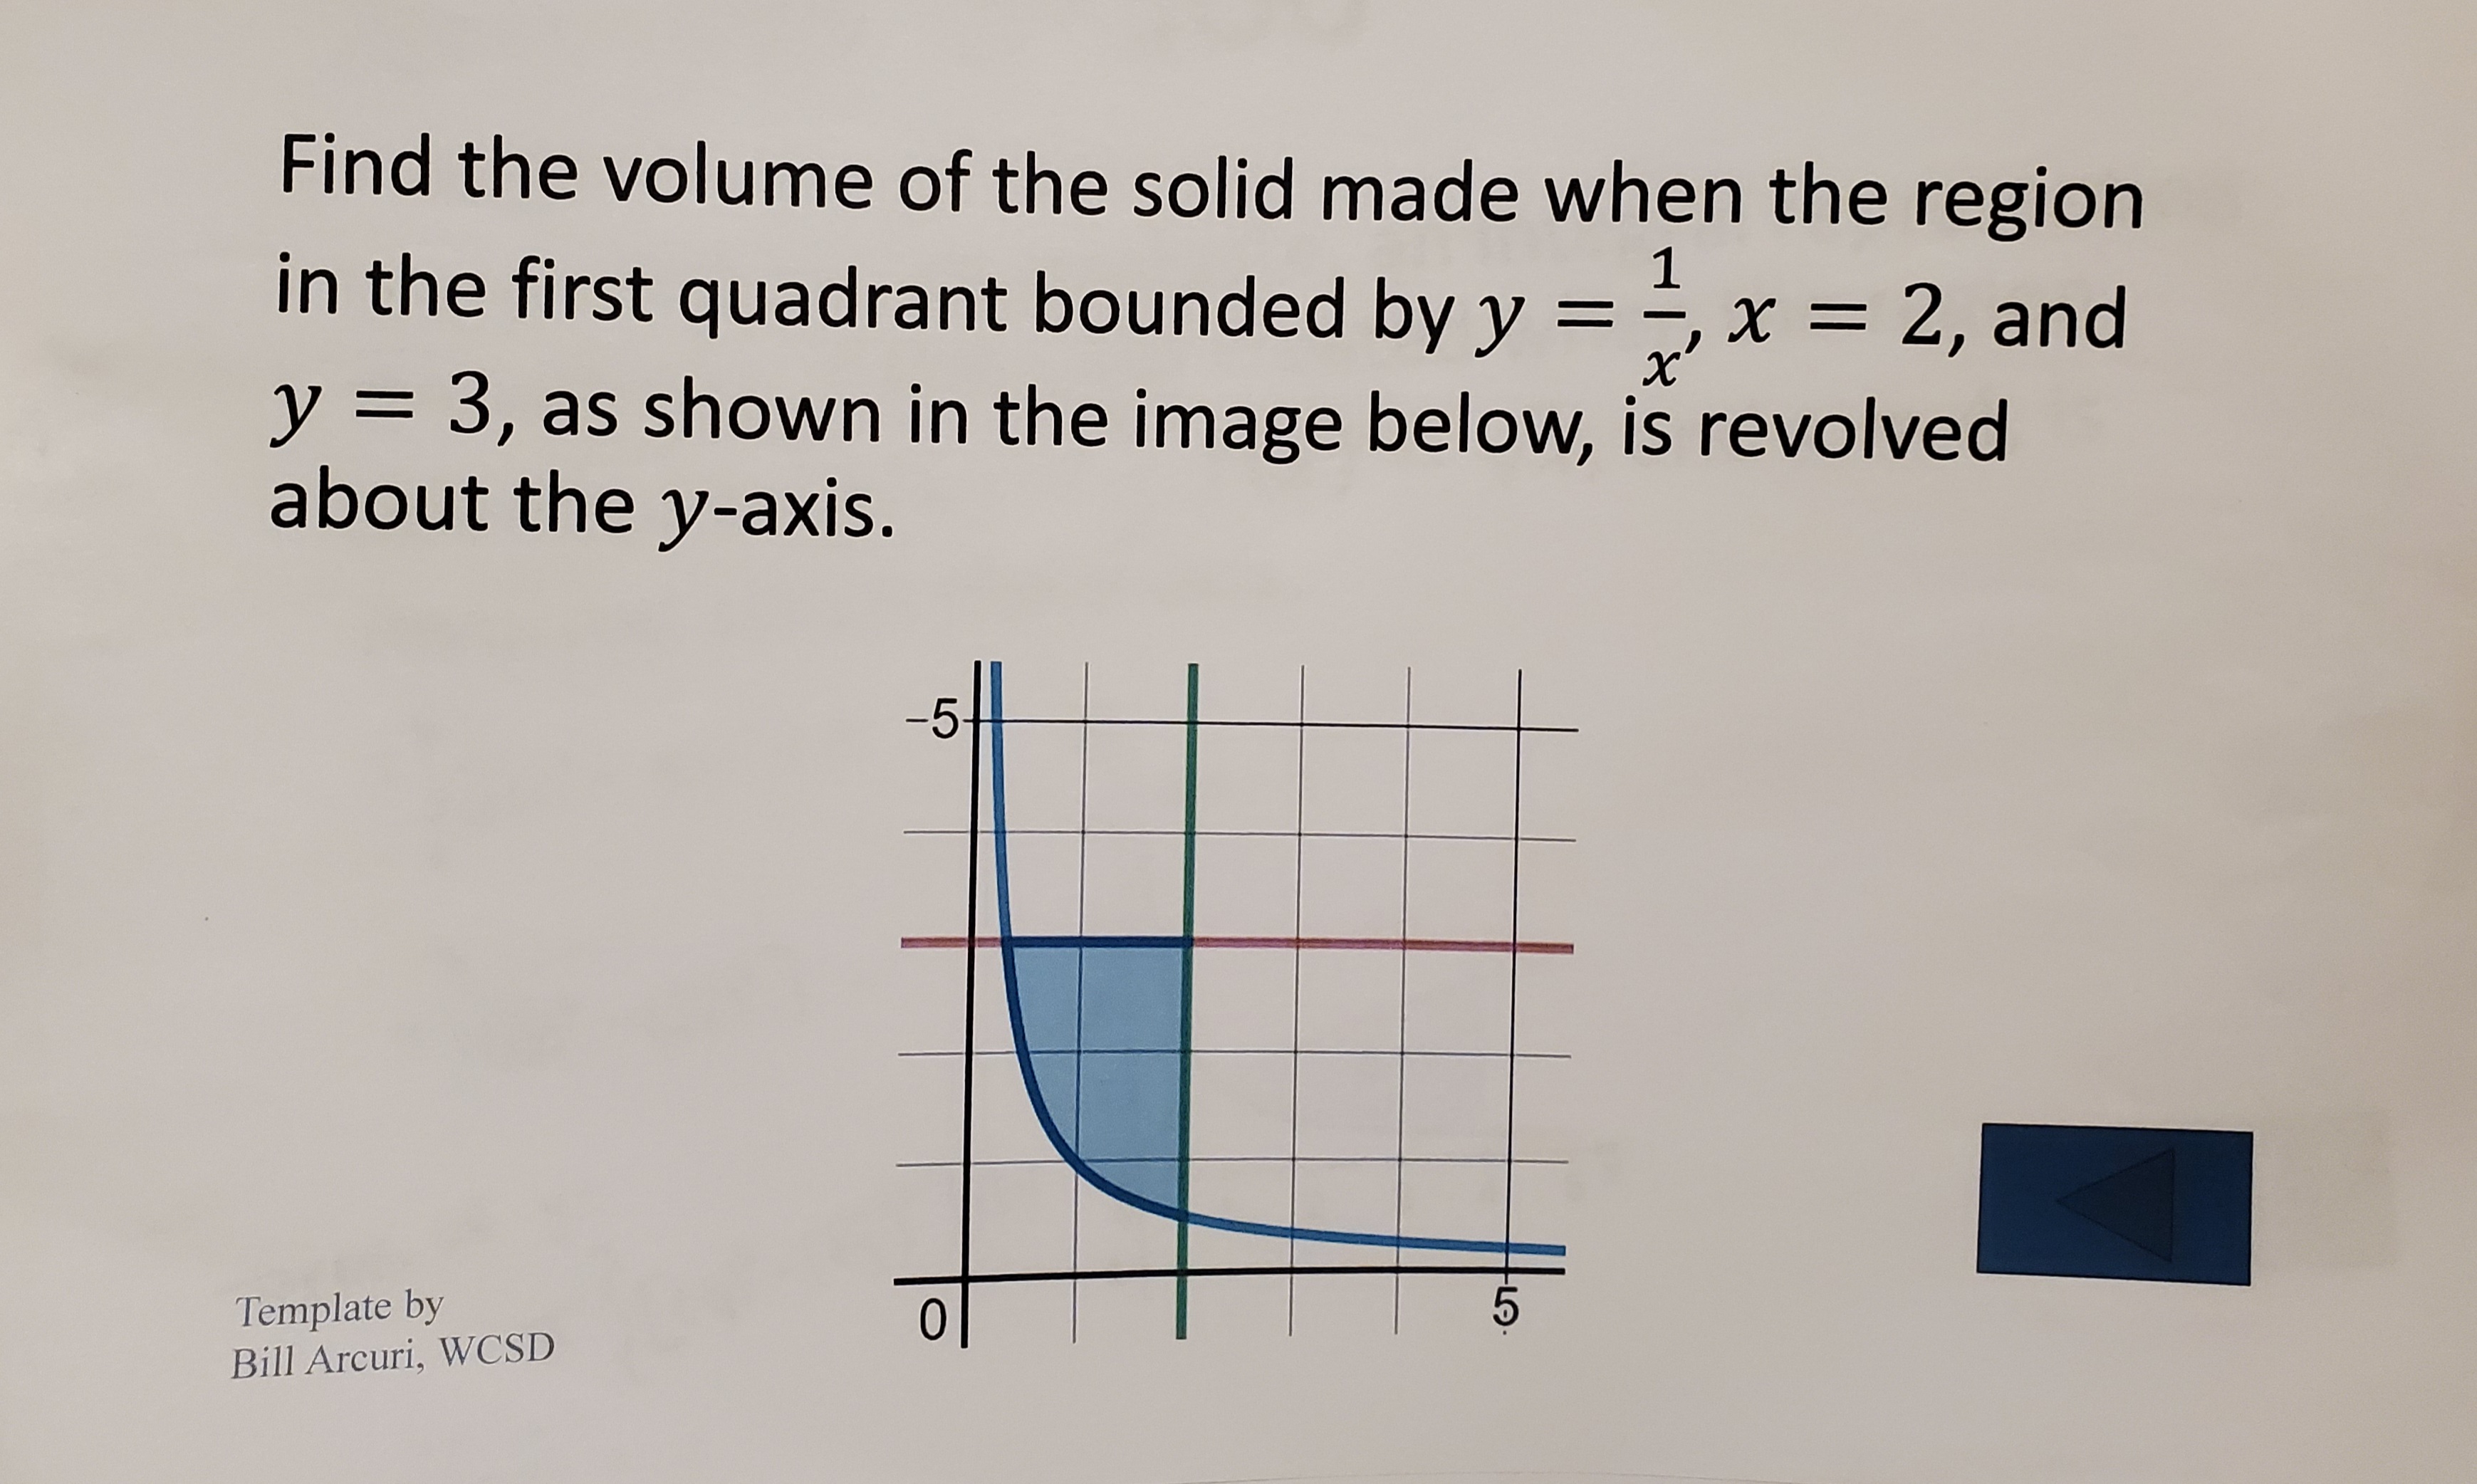 Find the volume of the solid made when the region
in the first quadrant bounded by y = ÷, x = 2, and
y = 3, as shown in the image below, is revolved
about the y-axis.
1
x'
-5
Template by
Bill Arcuri, WCSD
